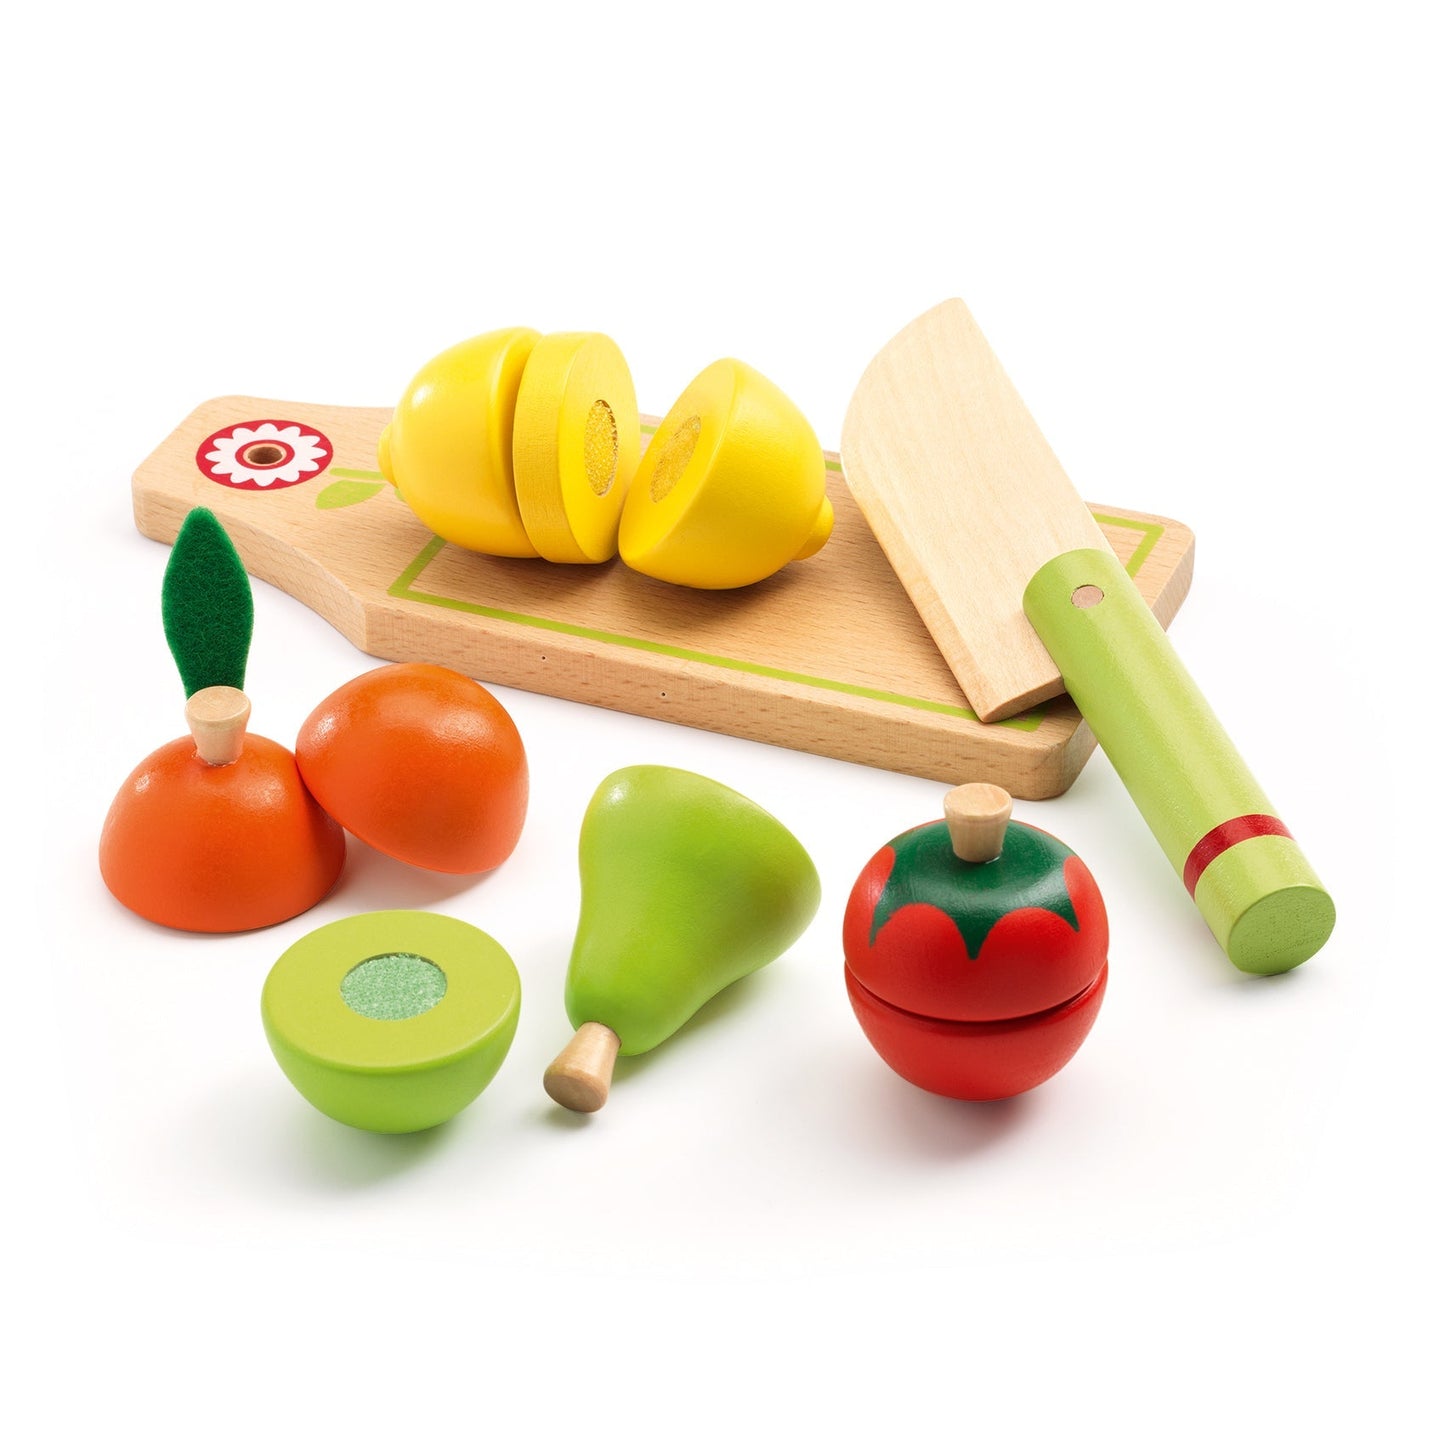 Djeco Cutting Fruit and Vegetables Role Playing Set